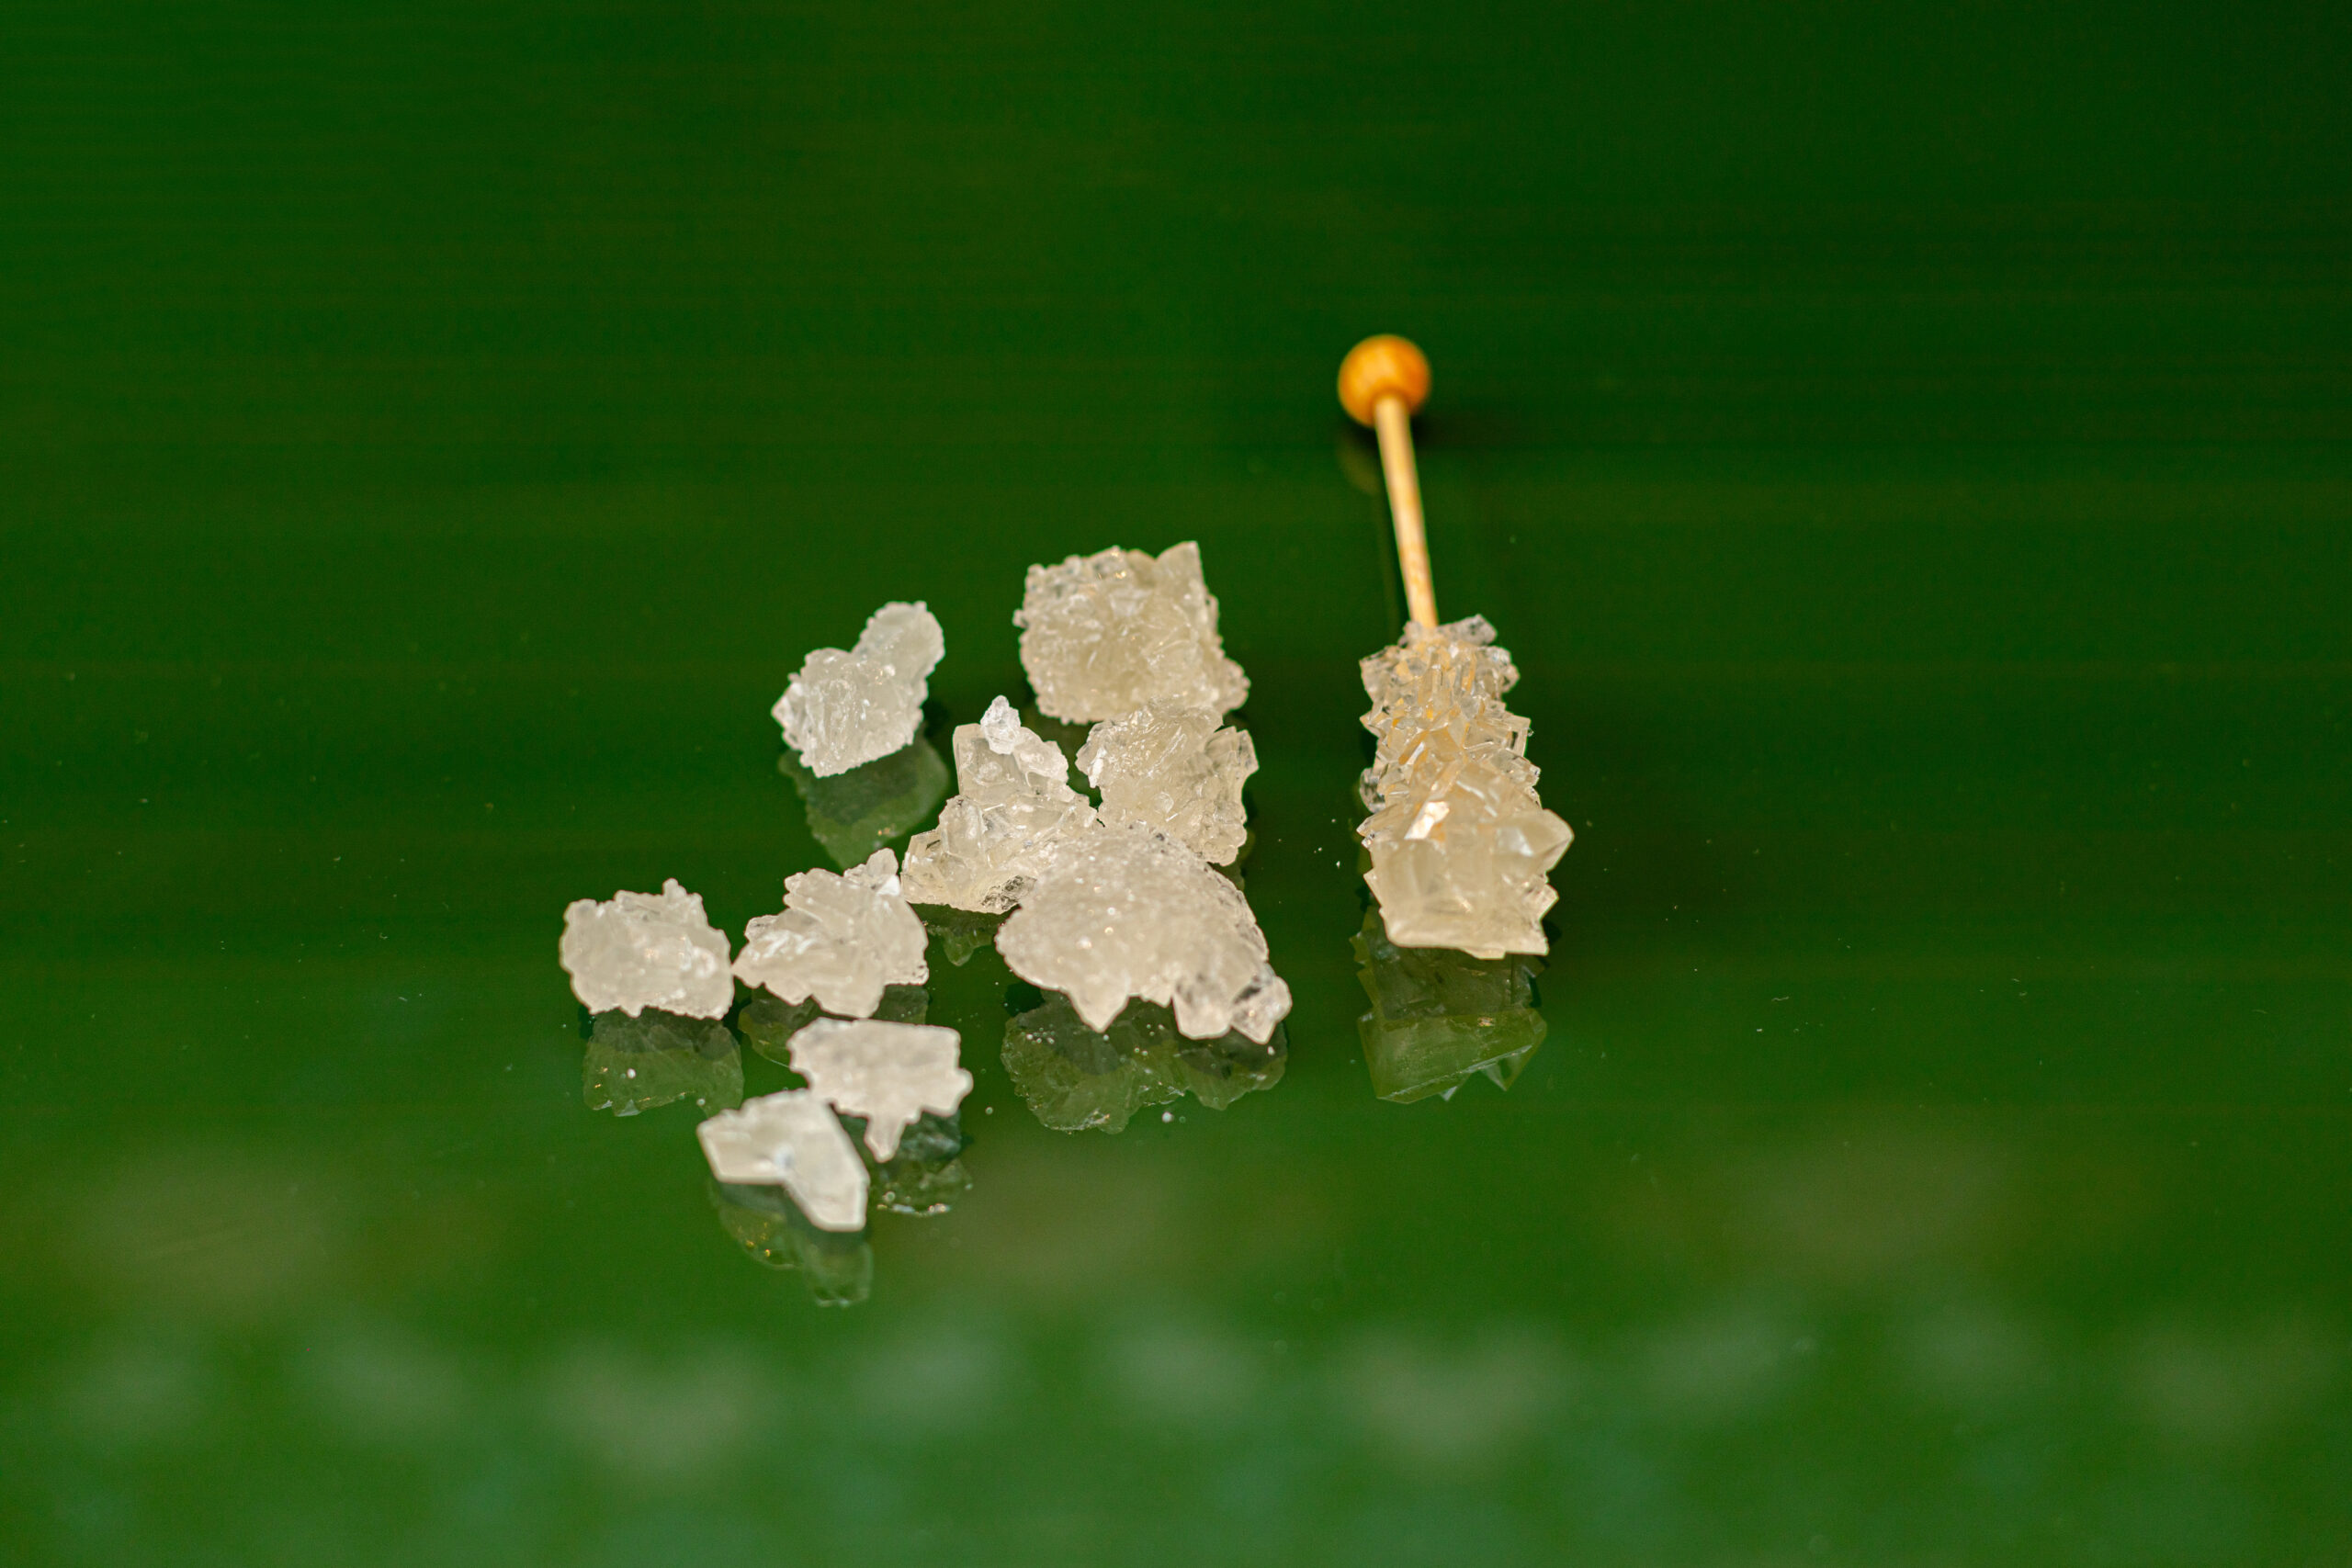 rock-candies-stick-laying-on-the-green-background